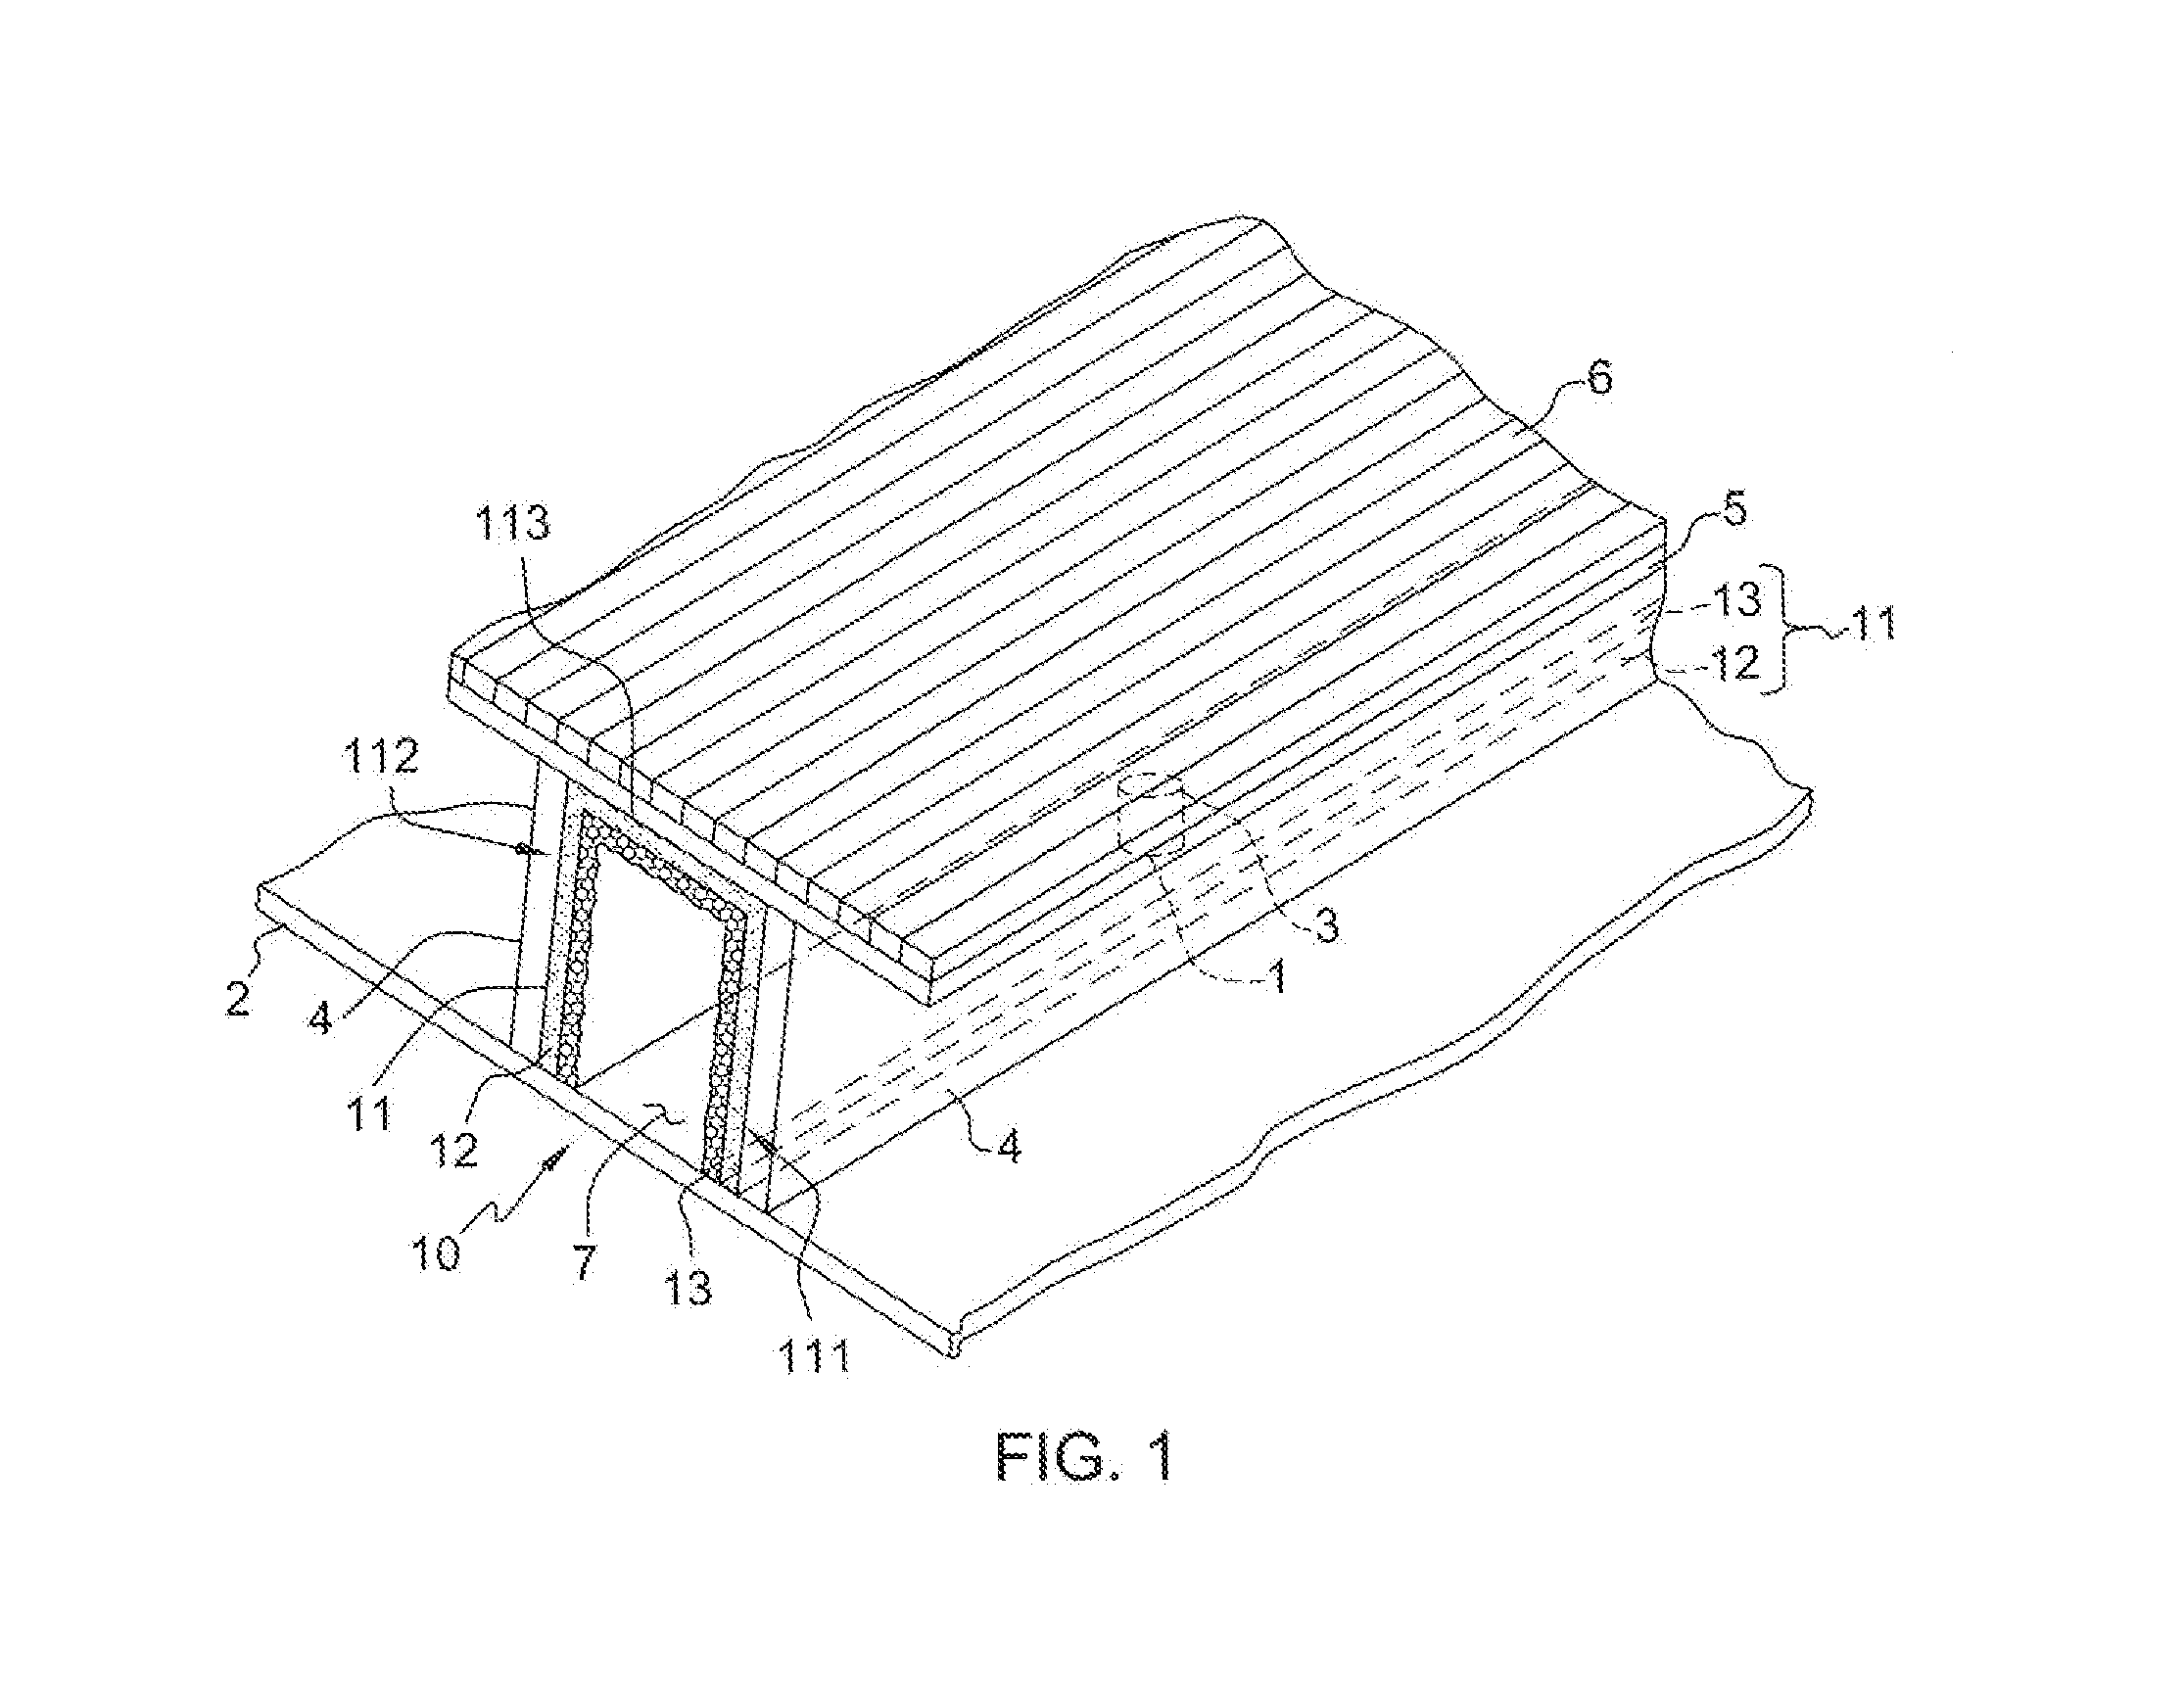 Perforation Acoustic Muffler Assembly and Method of Reducing Noise Transmission Through Objects